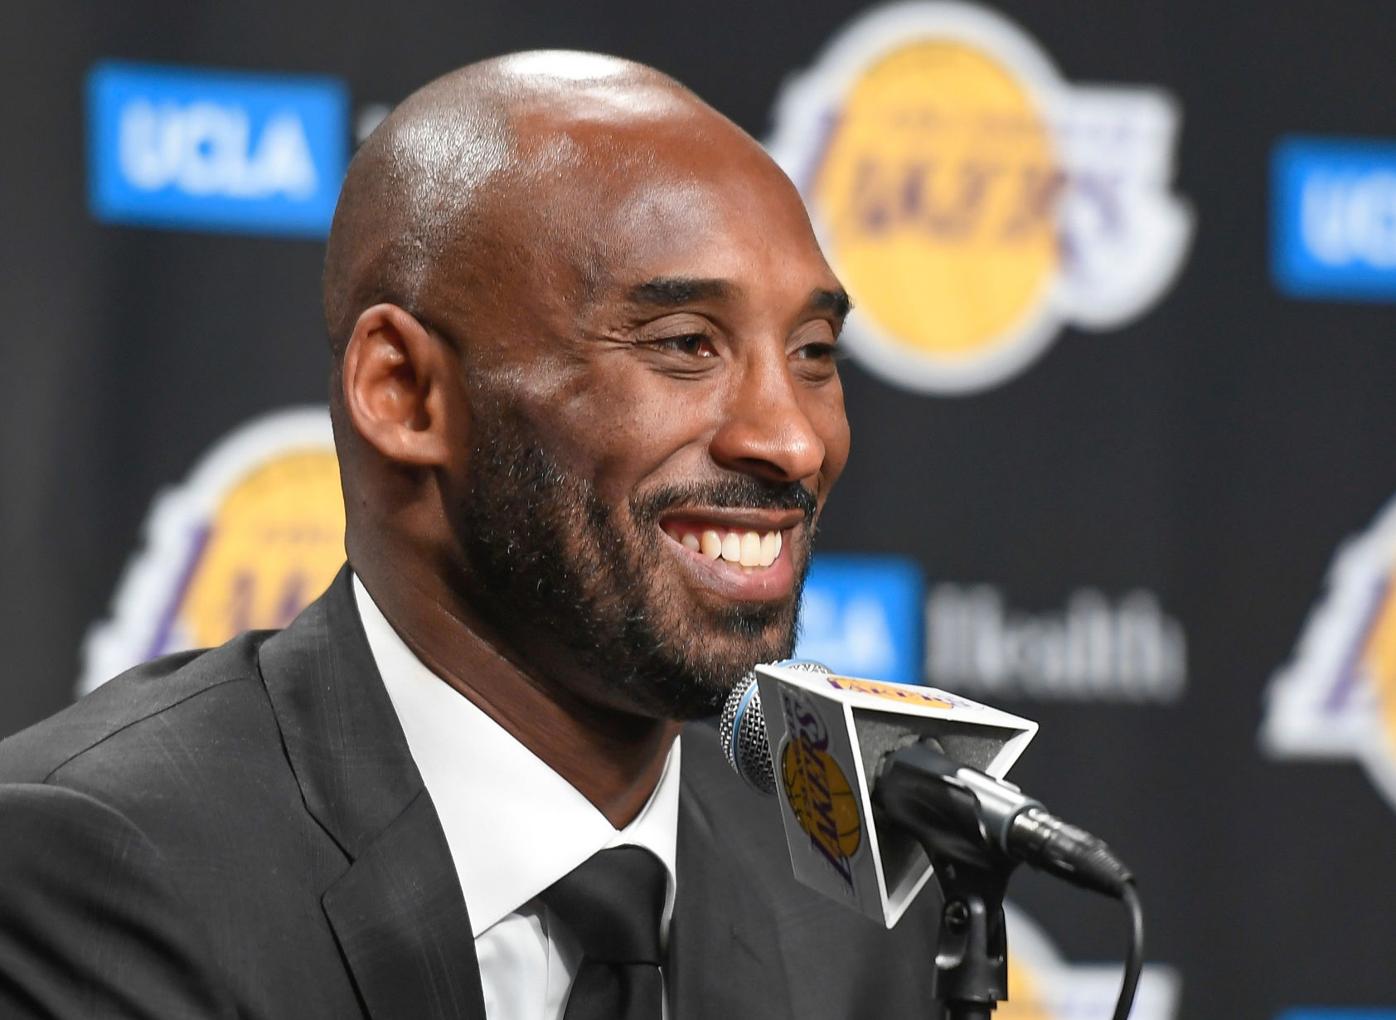 Kobe Bryant will be inducted into Basketball Hall of Fame this